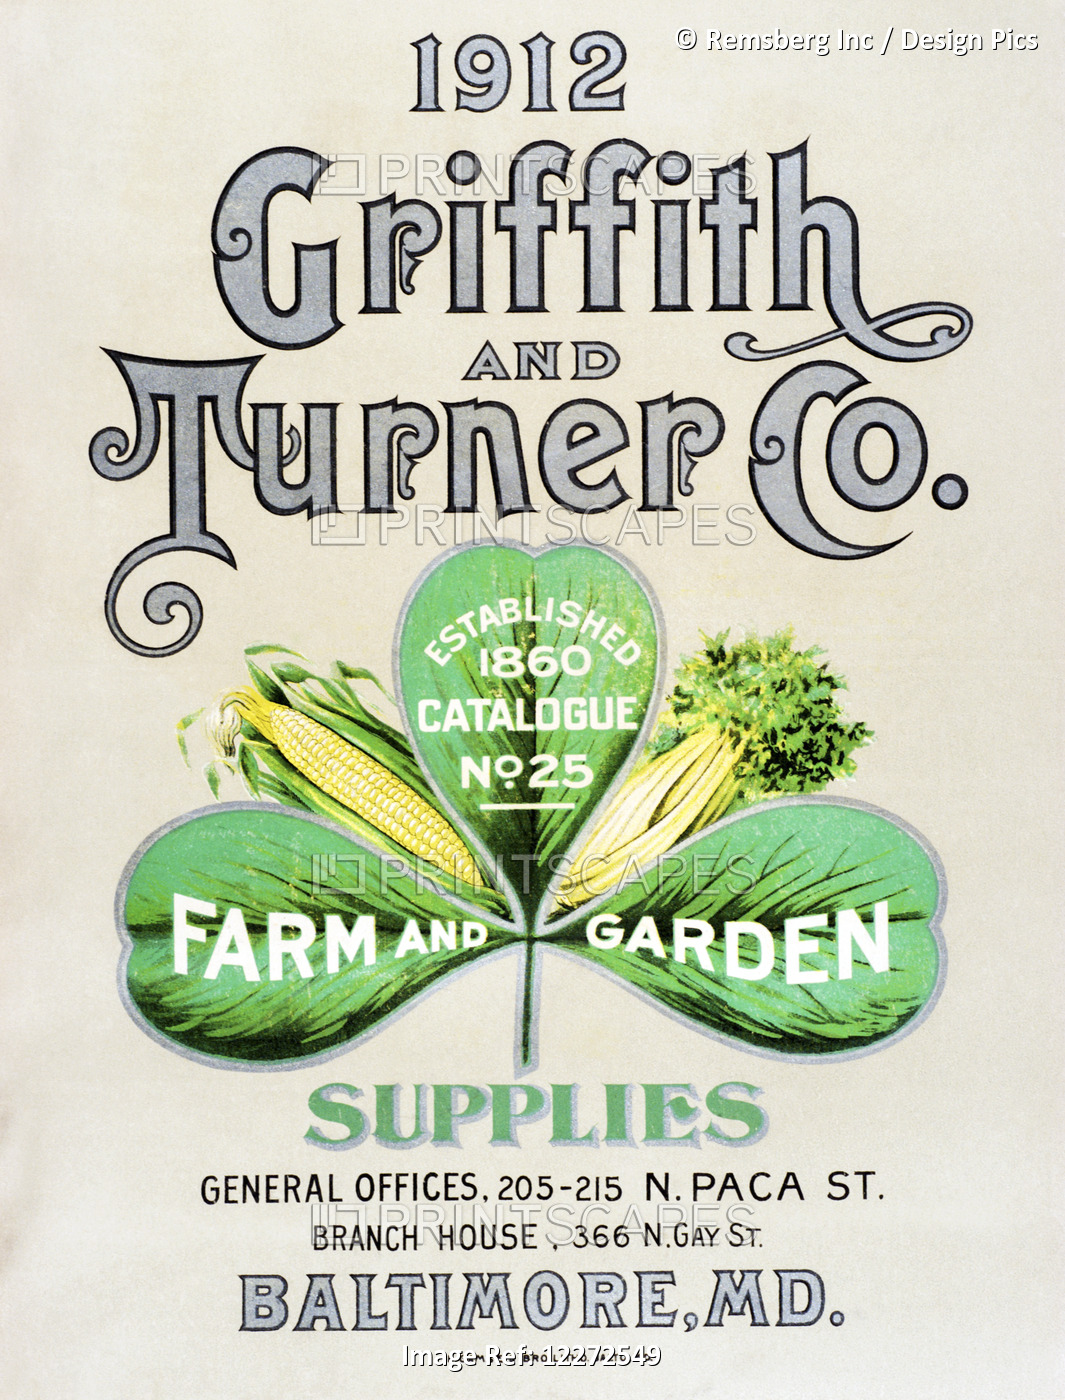 Historic Griffith And Turner Co. Farm And Garden Supply Catalog From Early 20th ...